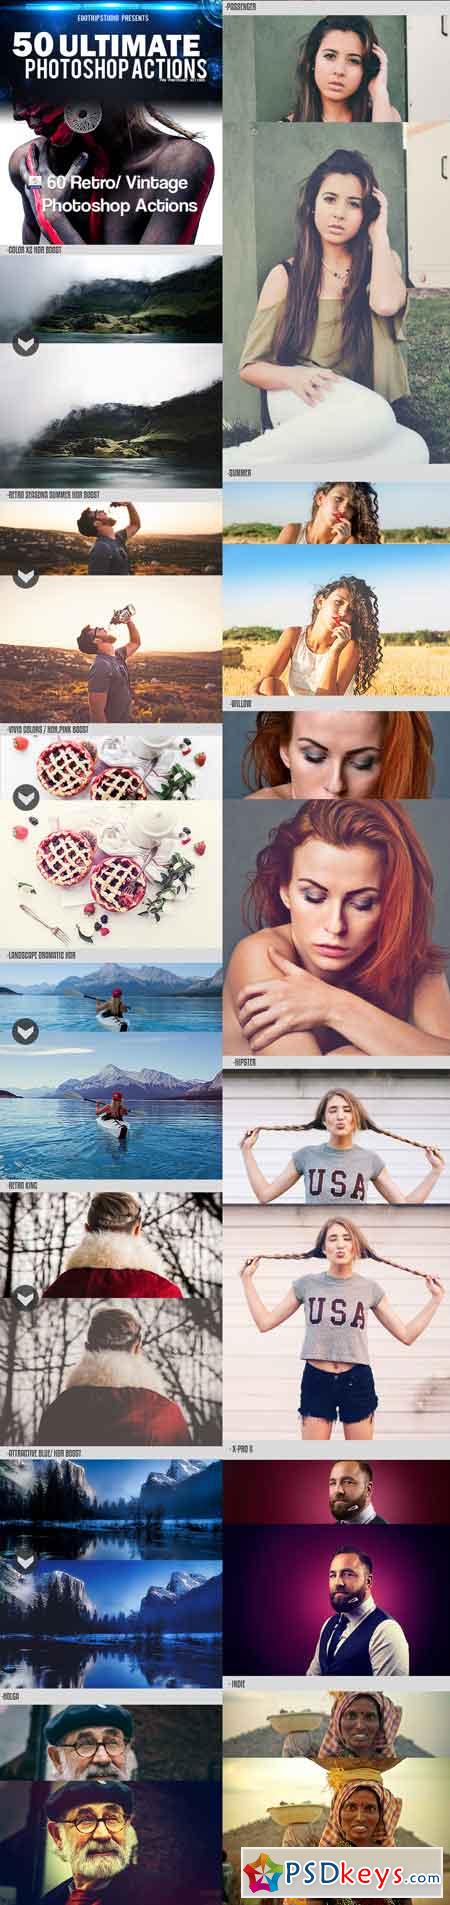 50 Ultimate Photoshop Actions 18017631